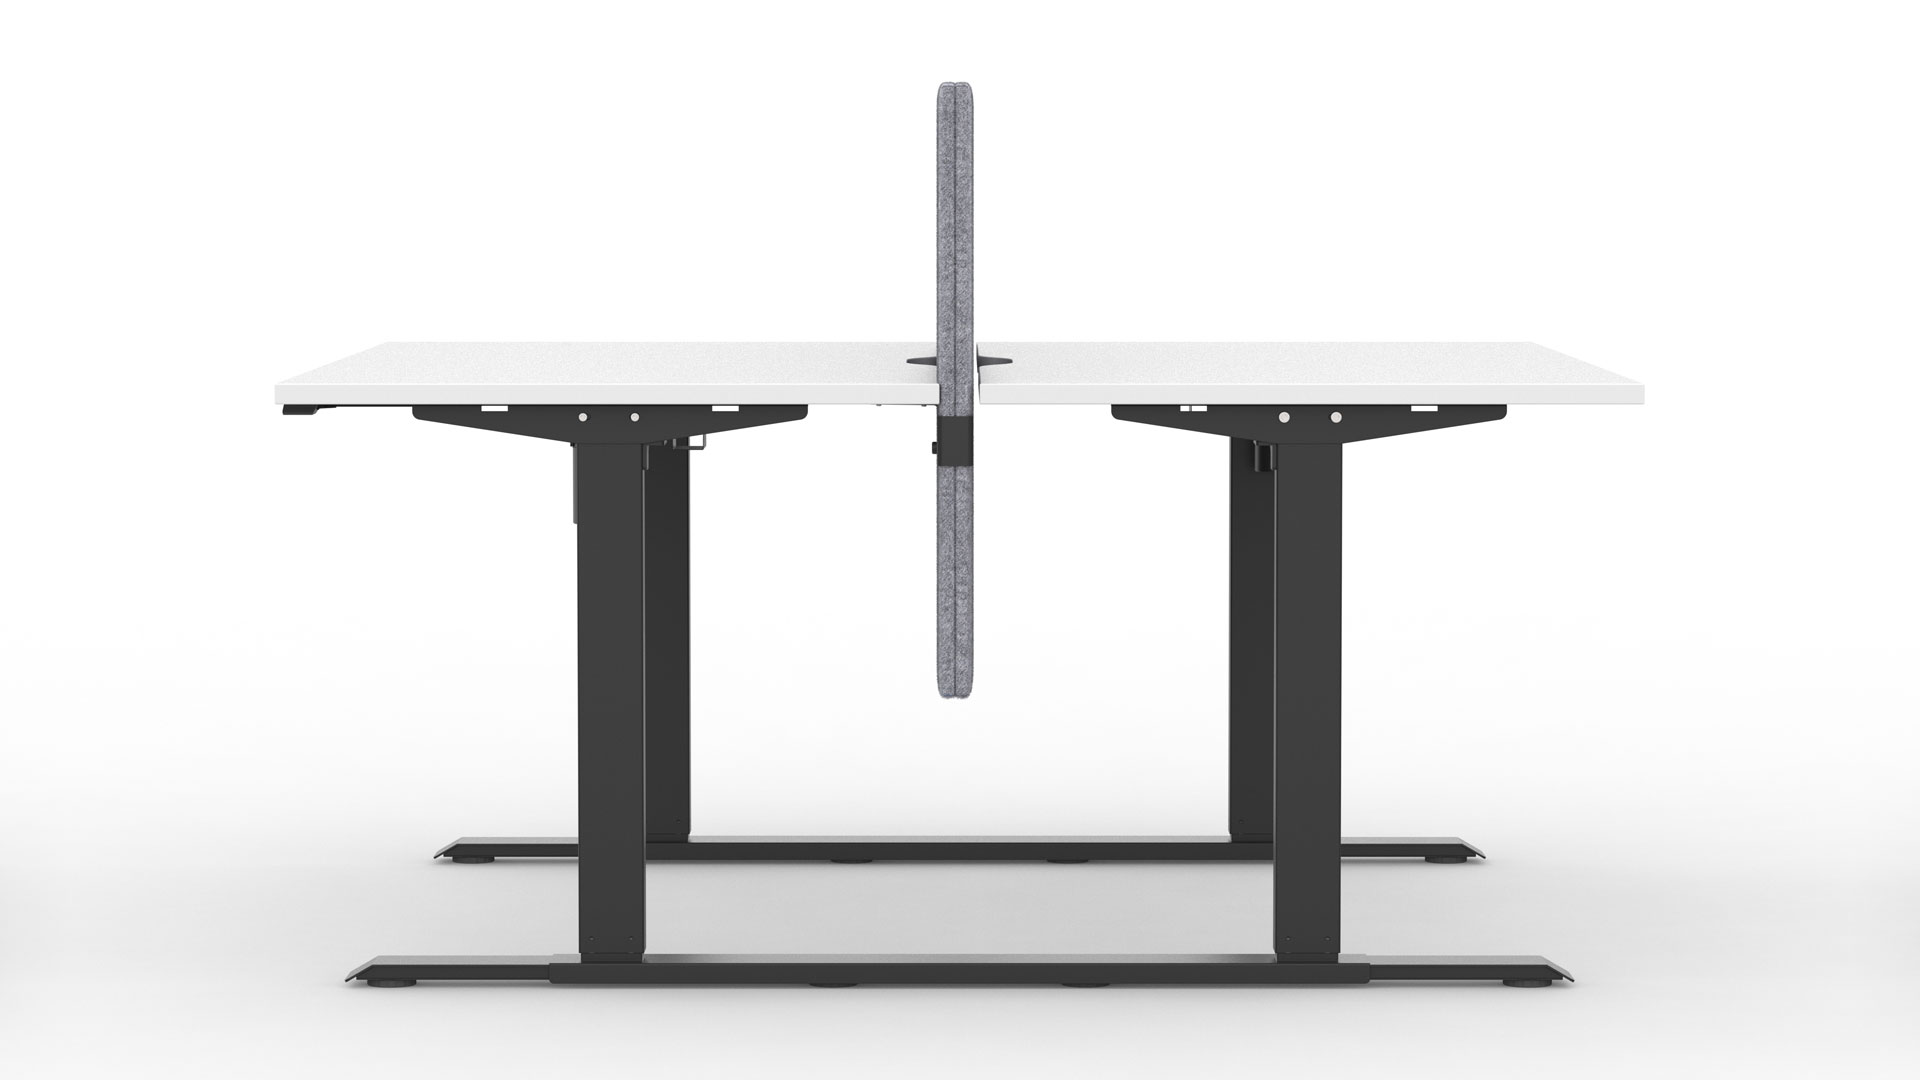 Acoustic desk screens are 740mm in height and attach to one desktop